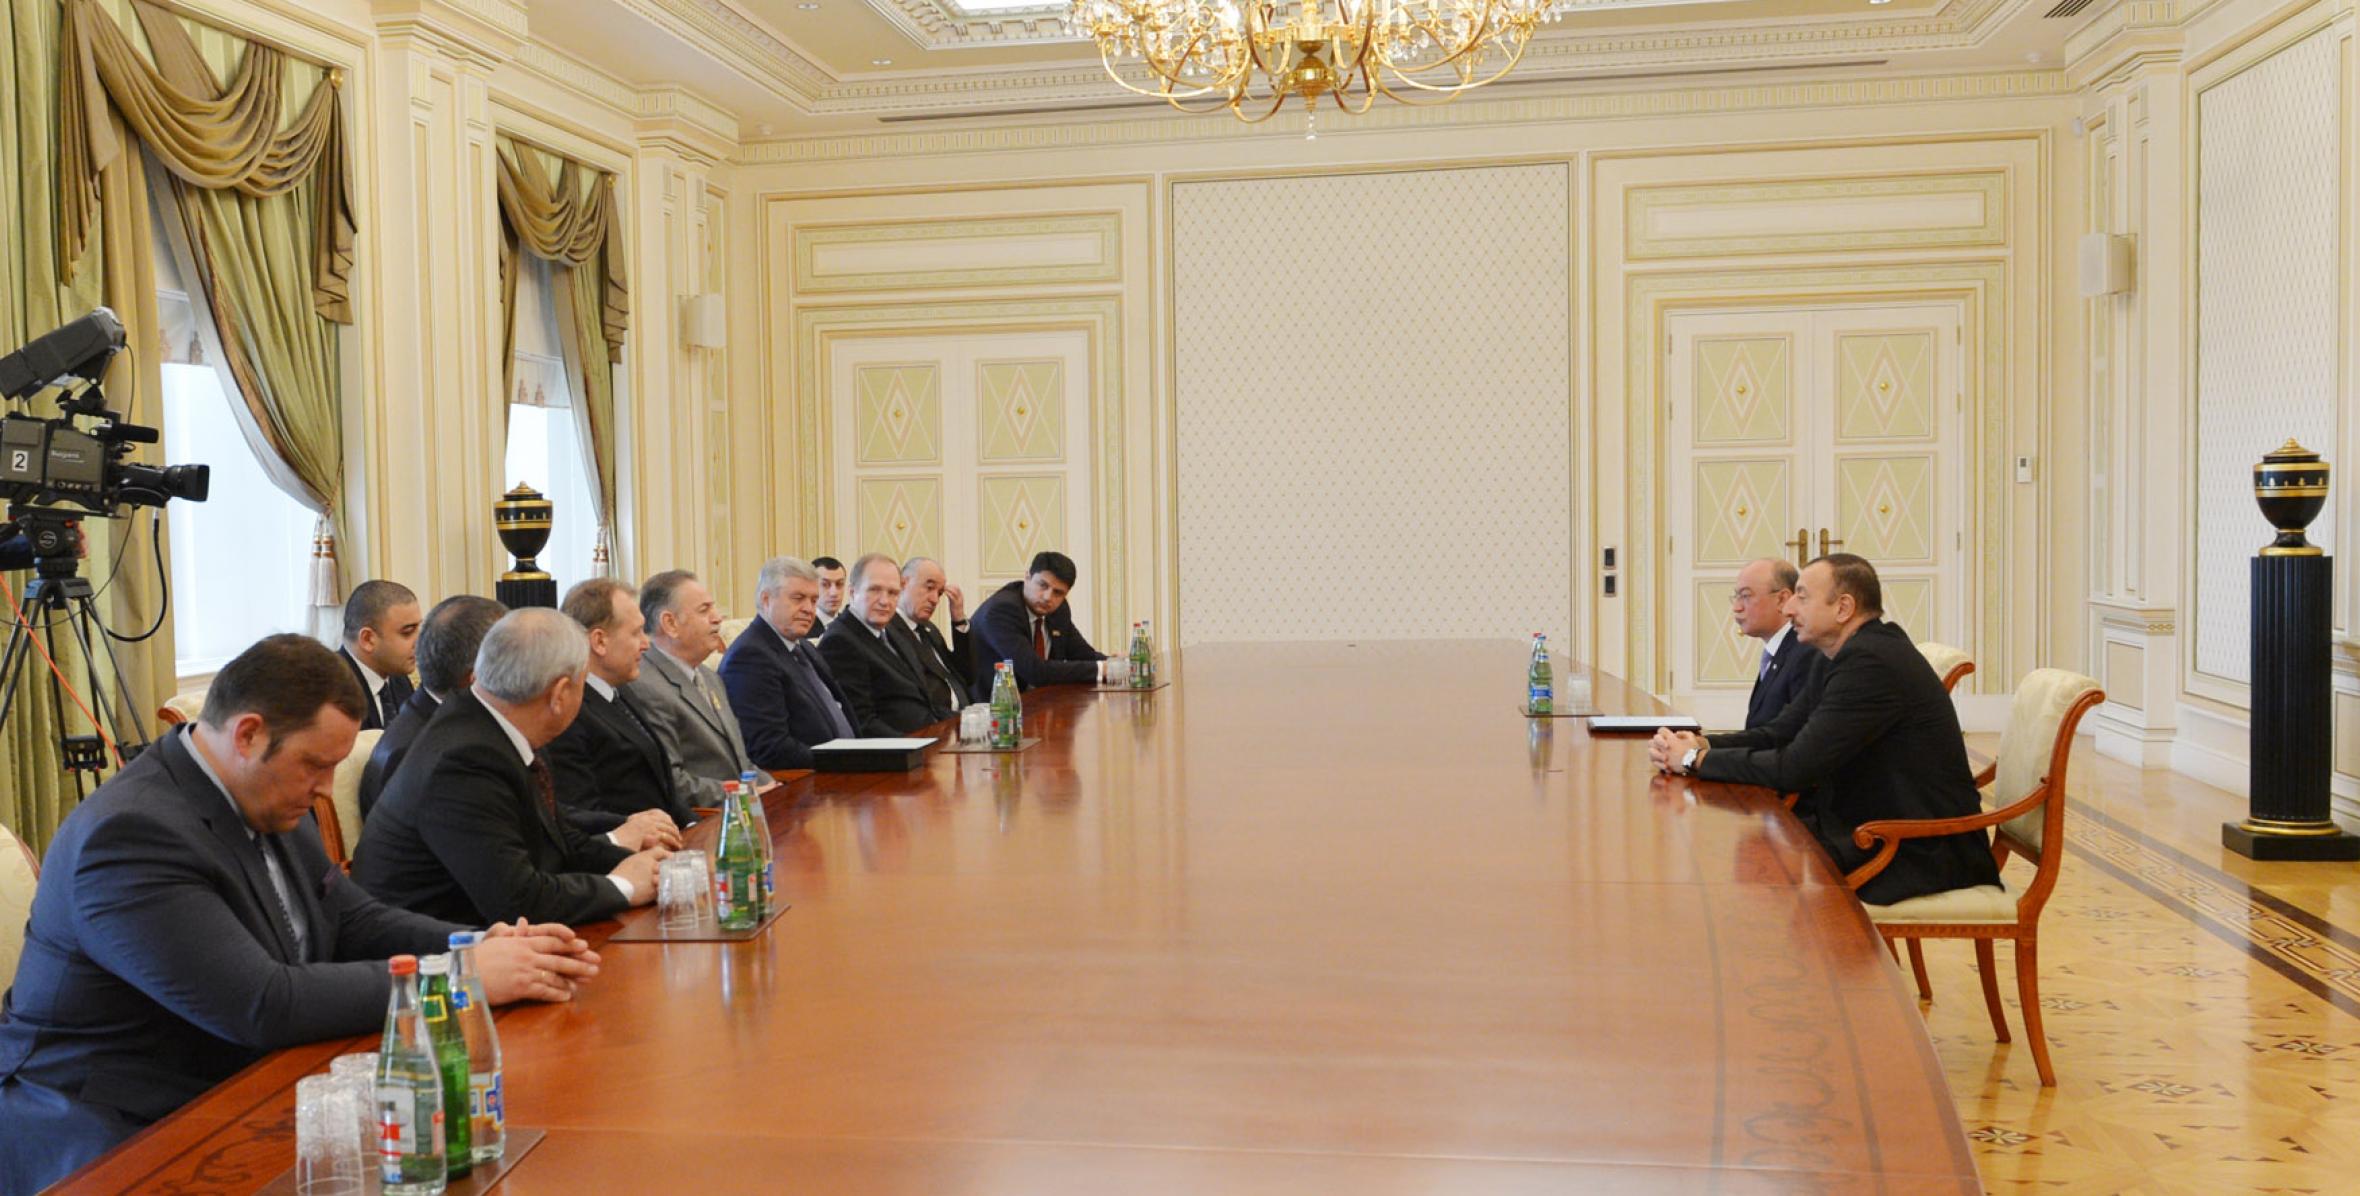 Ilham Aliyev received participants in an international conference